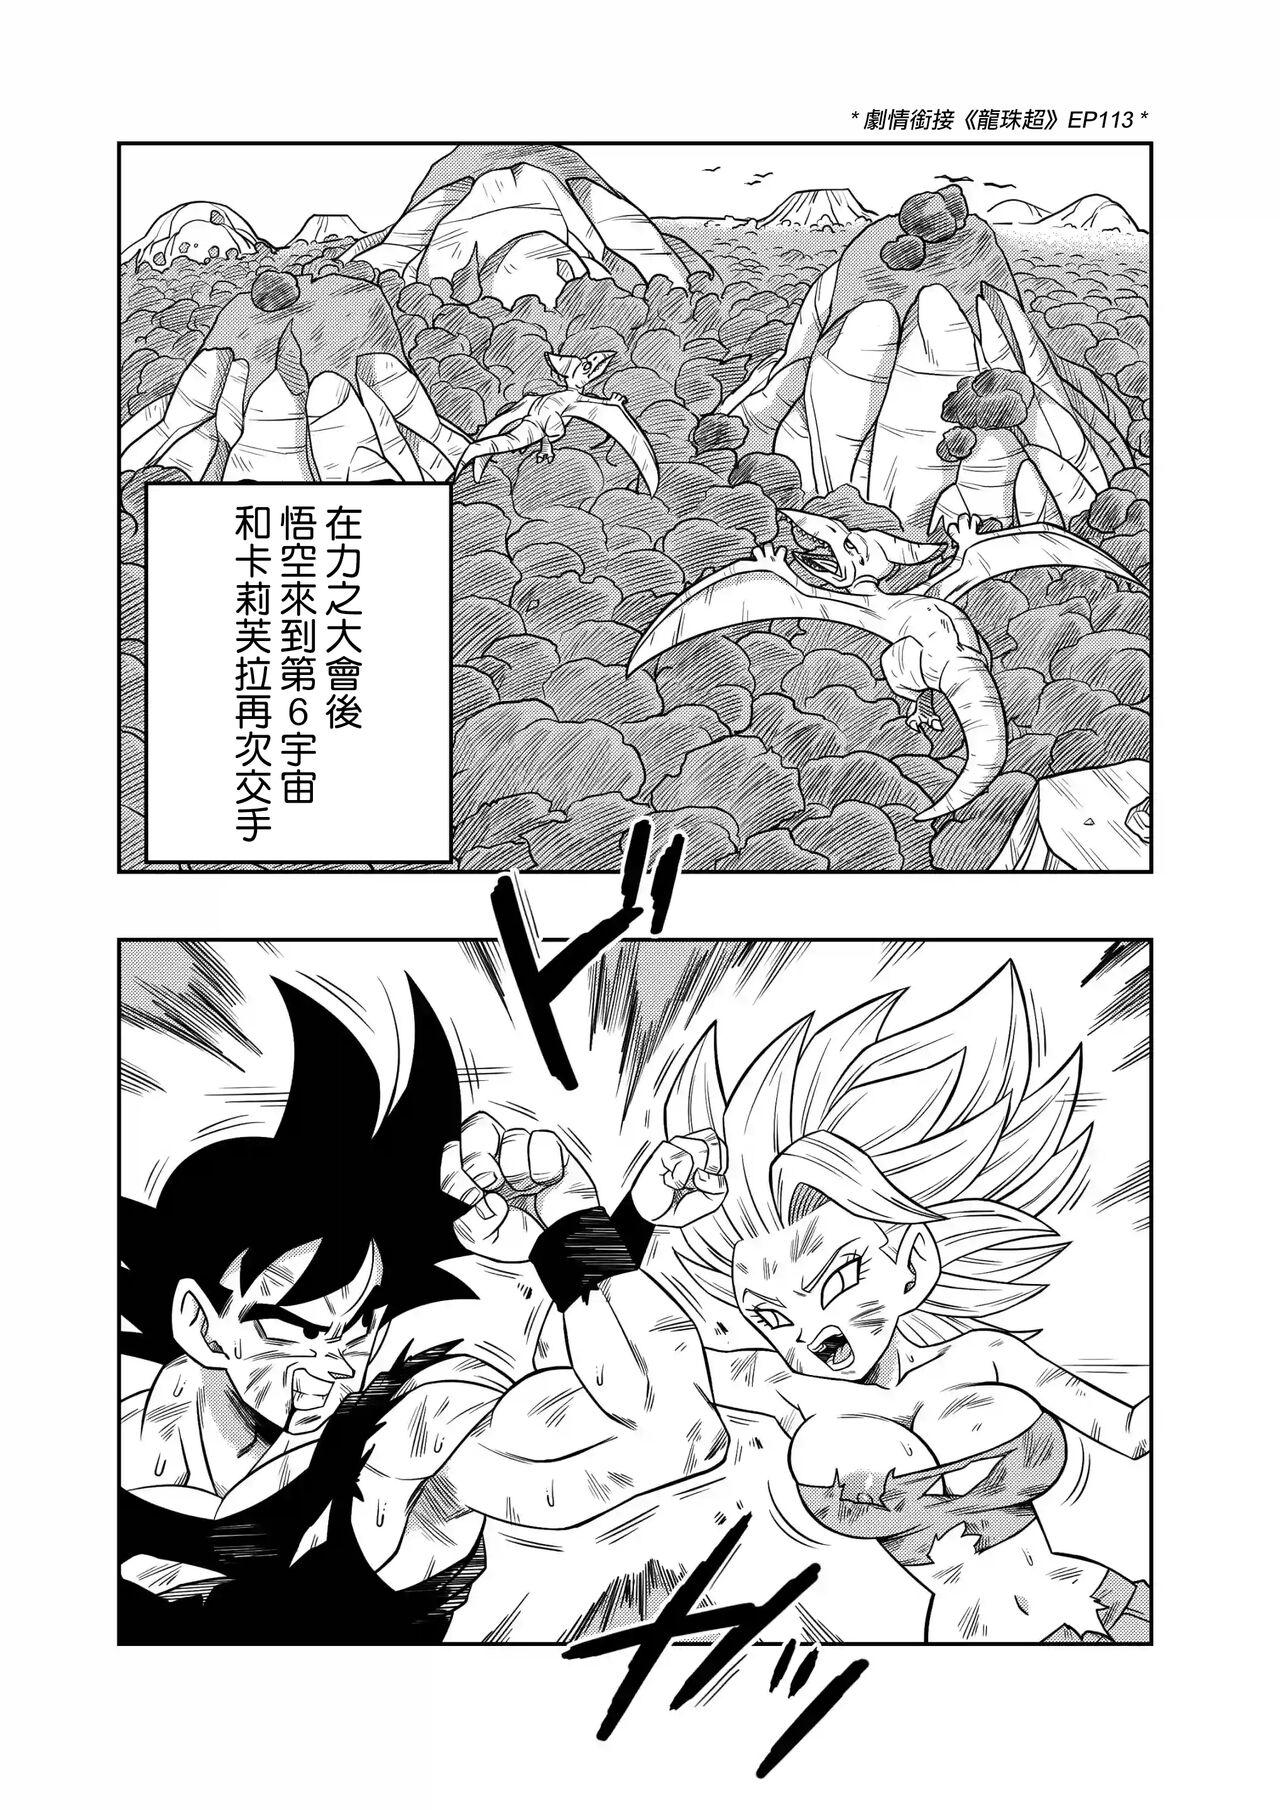 Wet Pussy Fight in the 6th Universe!!! - Dragon ball super Mas - Picture 3